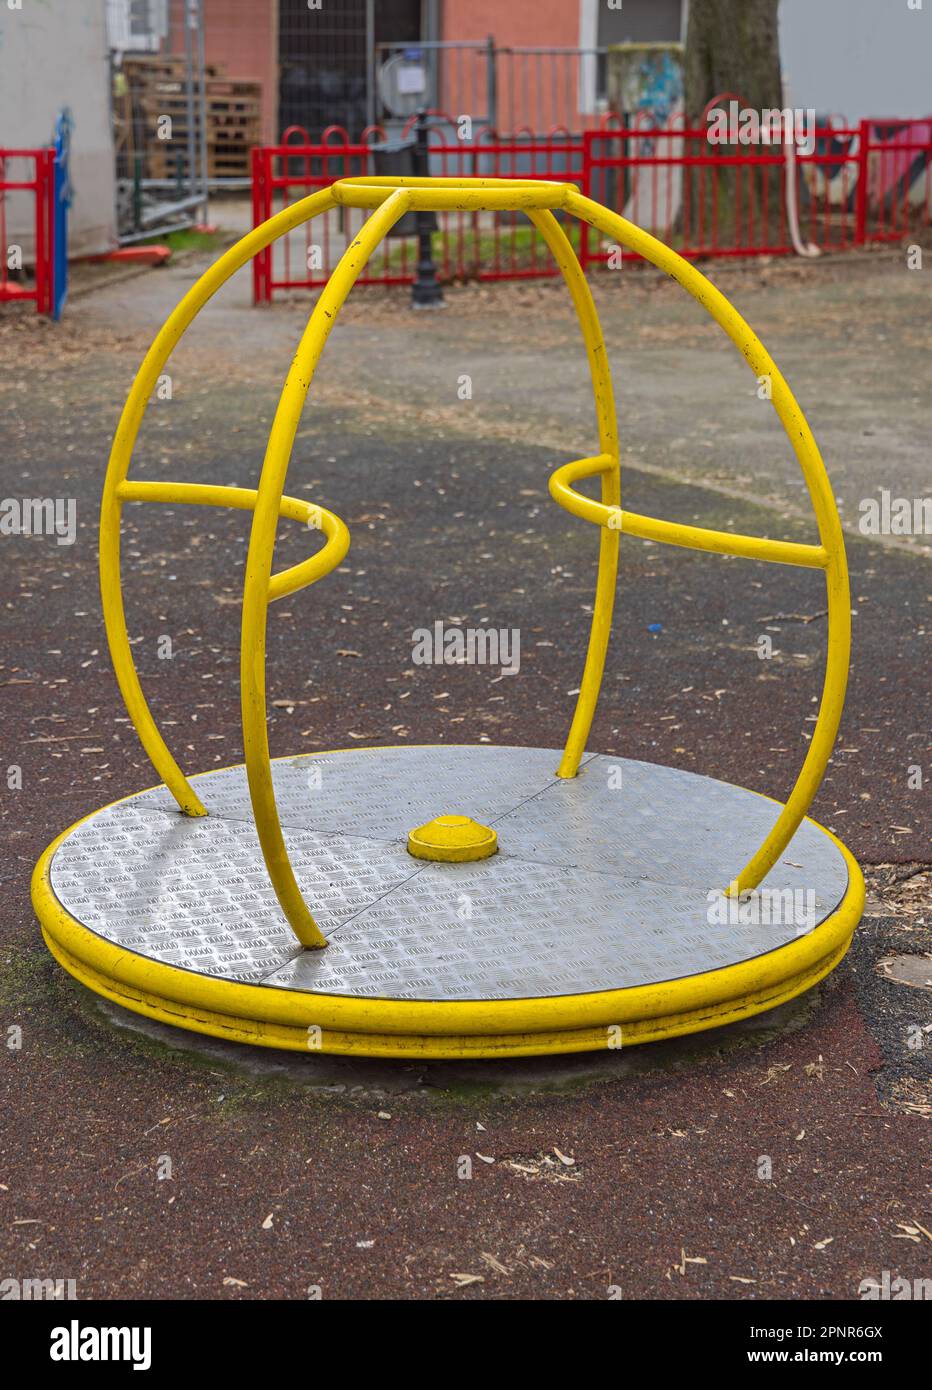 Spinning Platform With Yellow Pipes at Kids Playground Rotating Turning Stock Photo